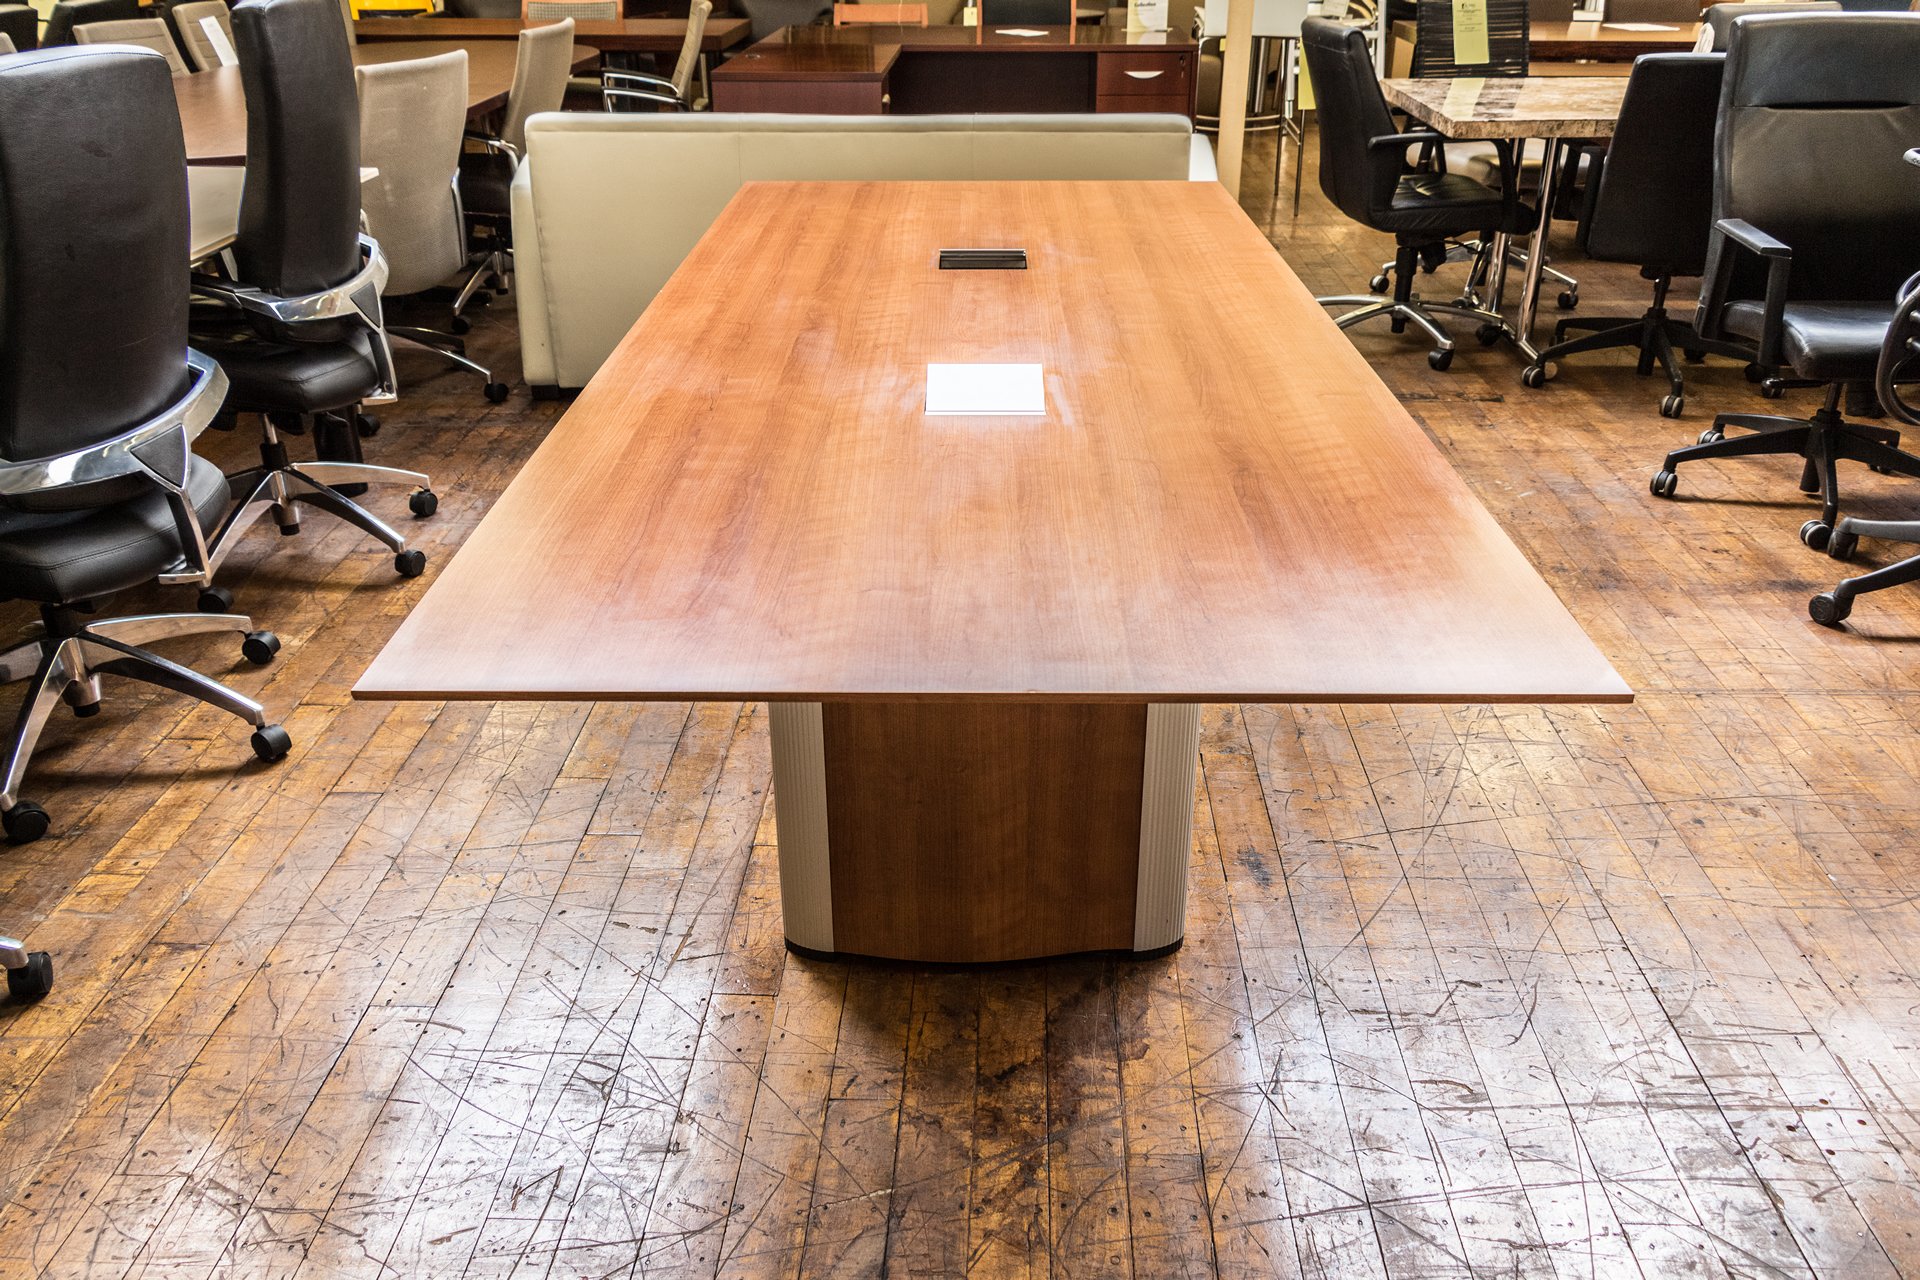 peartreeofficefurniture_peartreeofficefurniture_peartreeofficefurniture_nienkamper-vox-8-x-3-5-cherry-laminate-tapered-edge-conference-table.jpg